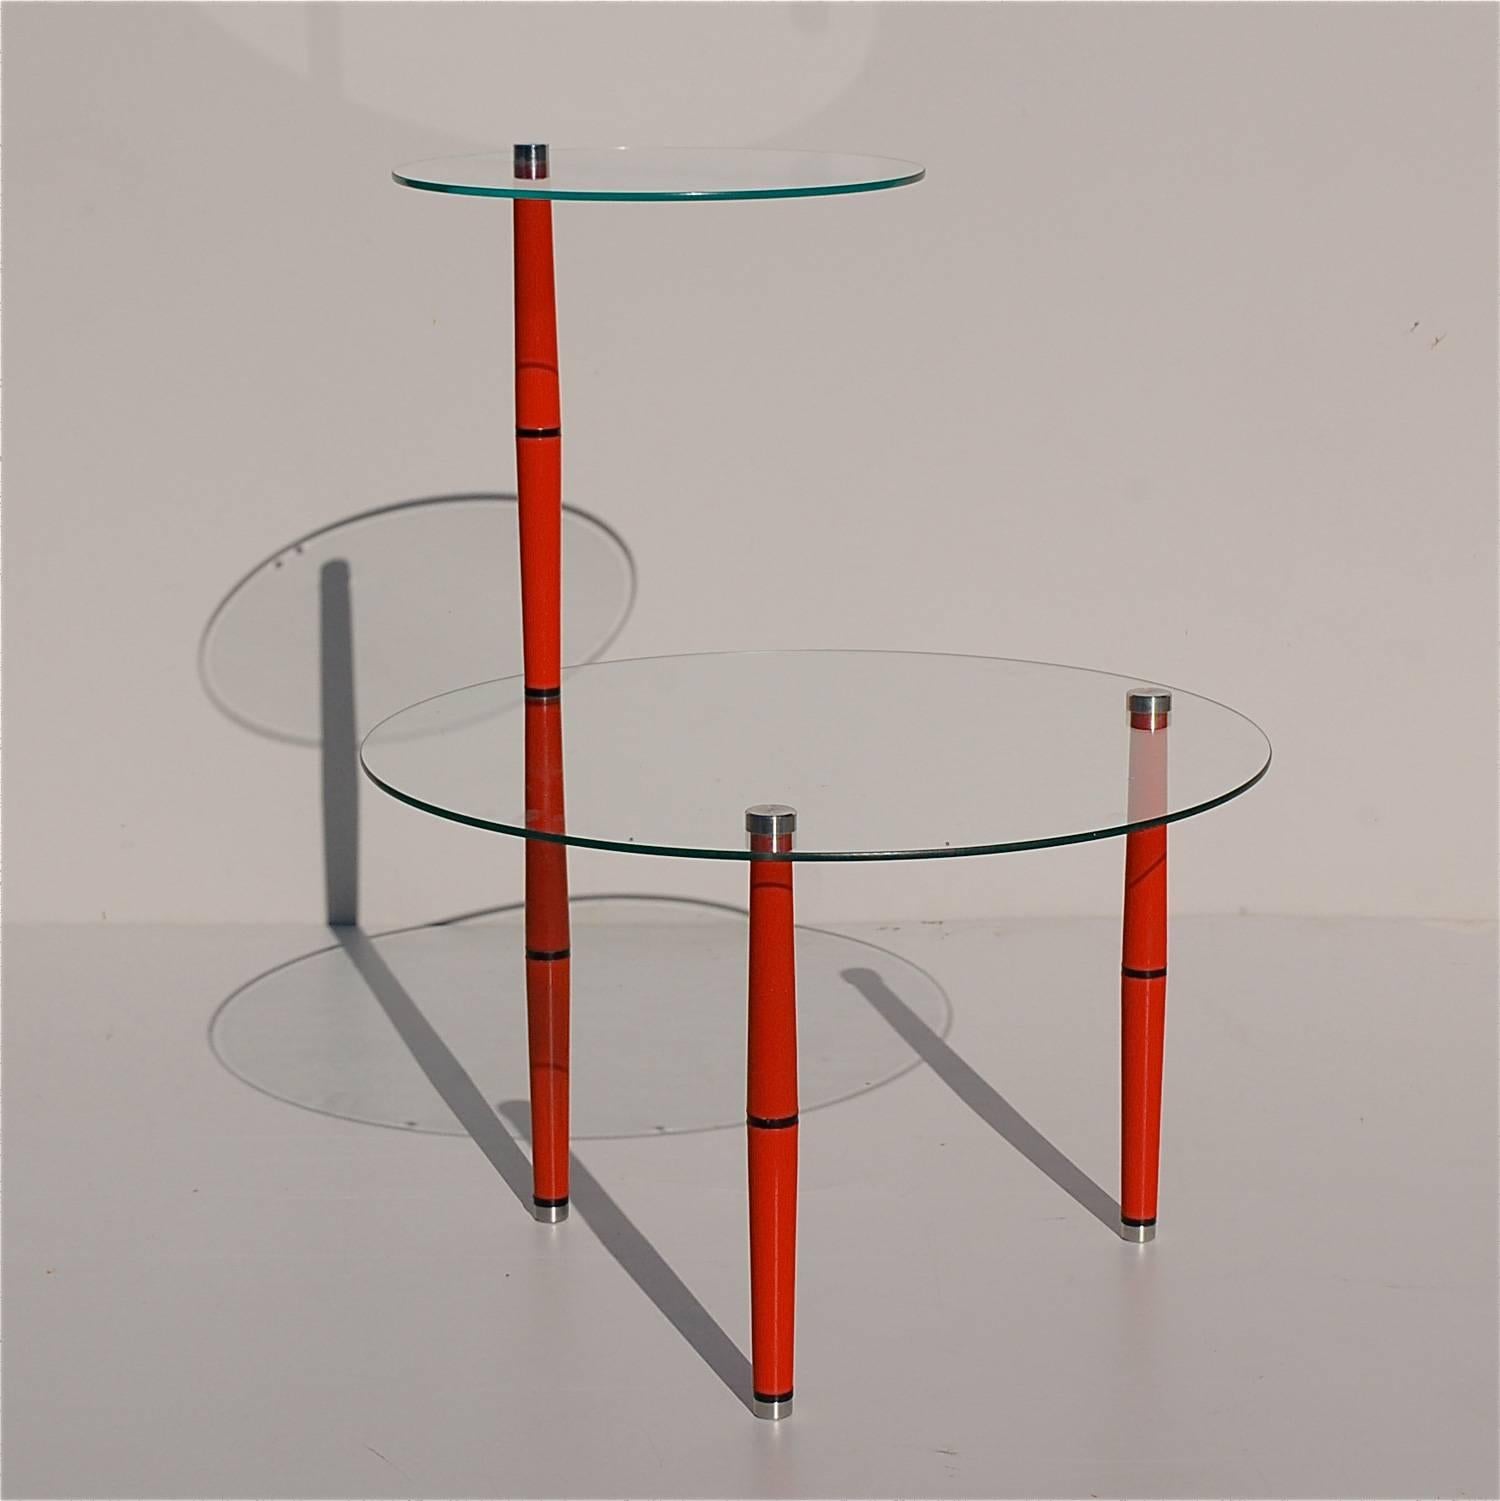 This vintage shop window display table has a Dual purpose as a two tiered, colorful side table. Please check the Profound Objects shopfront for other available models and colors. Different configurations are possible by assembling individual glass